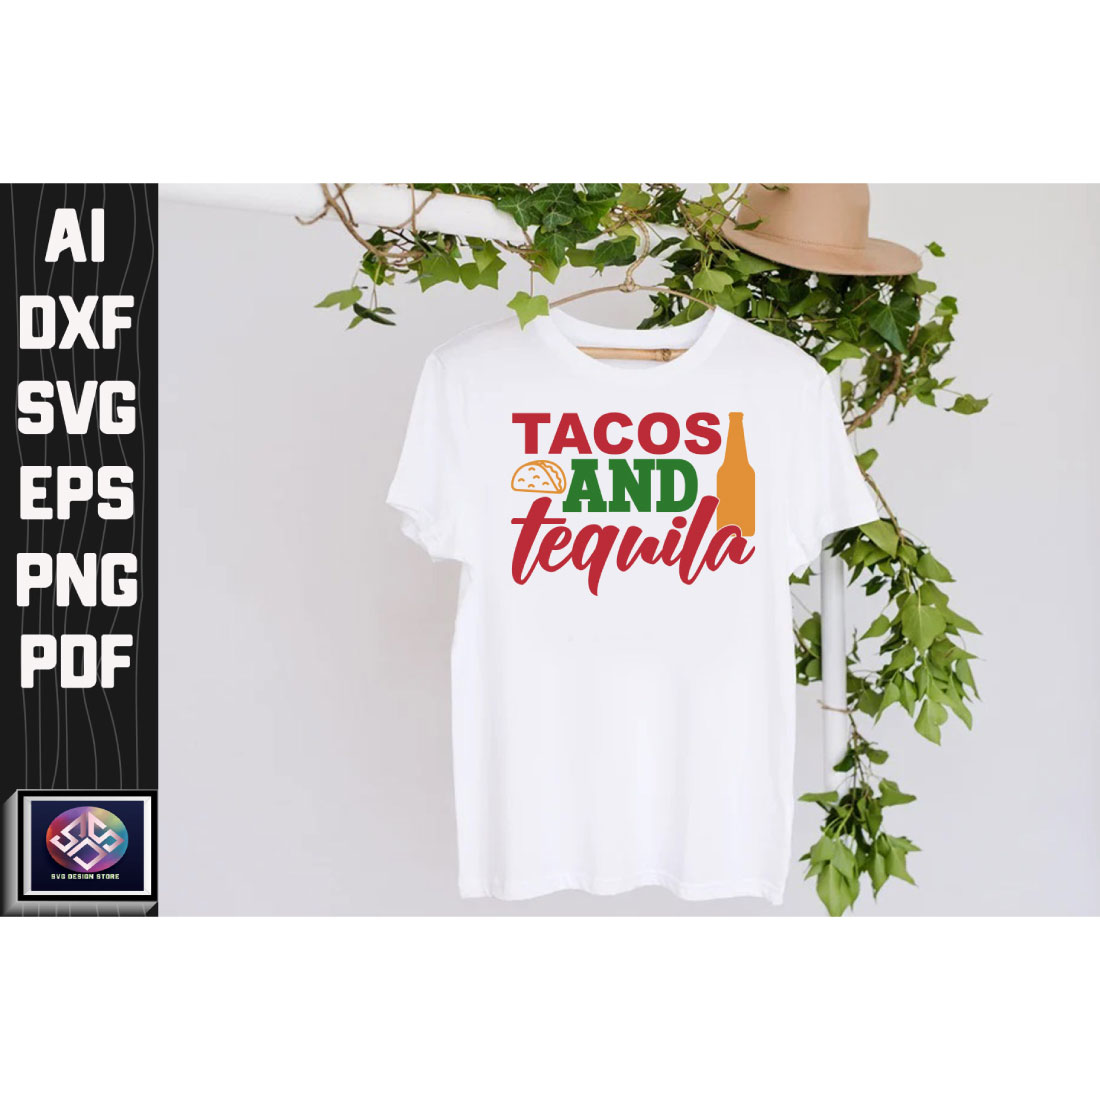 T - shirt that says tacos and tequila on it.